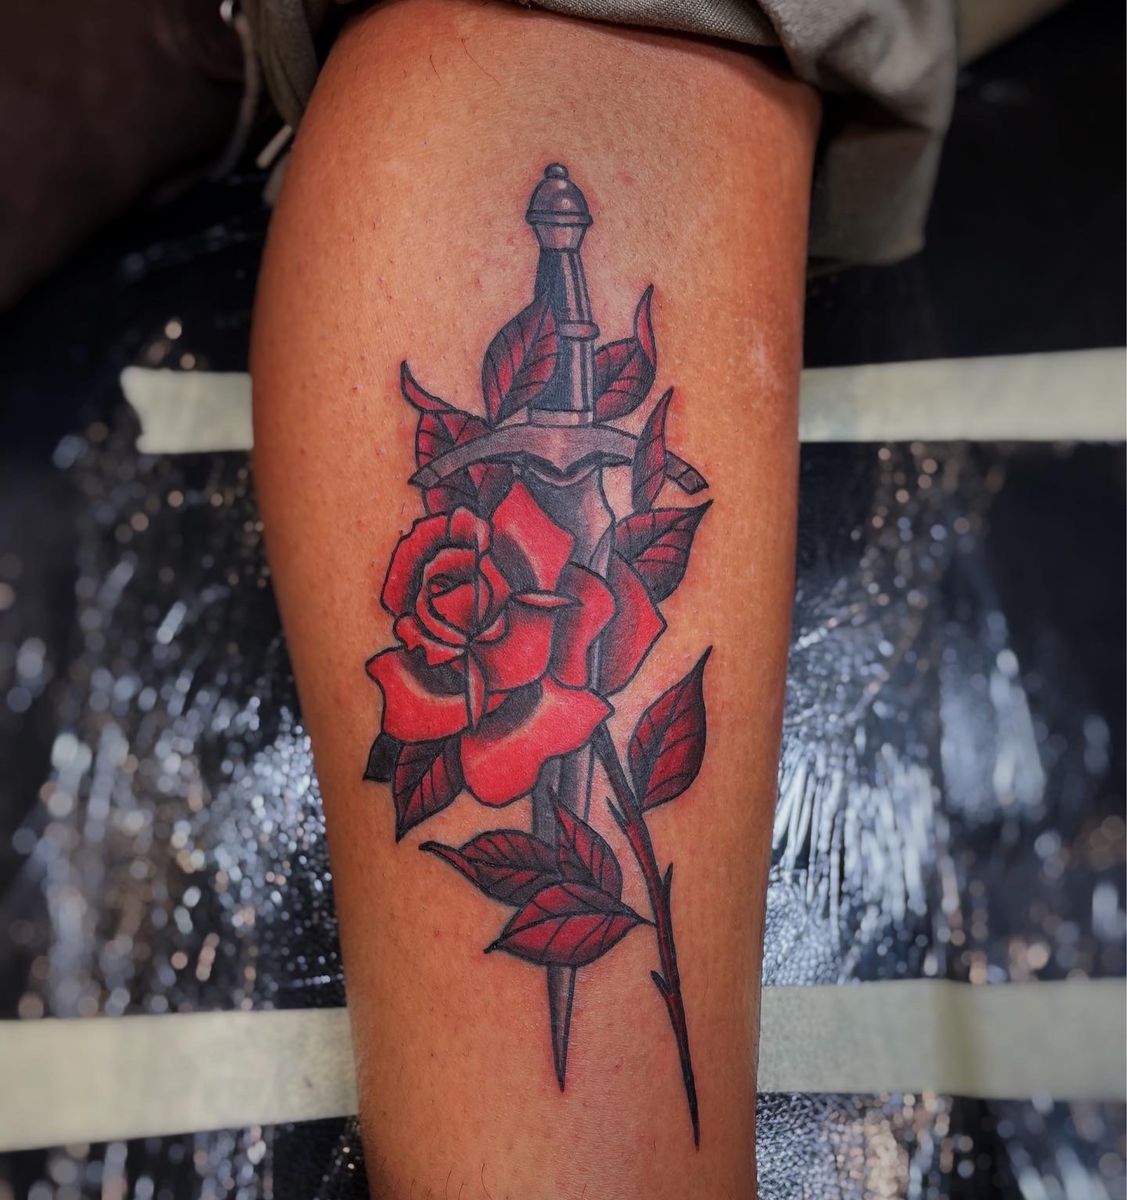 Tattoo uploaded by Vinny Scialabba • Rose & dagger down at New England